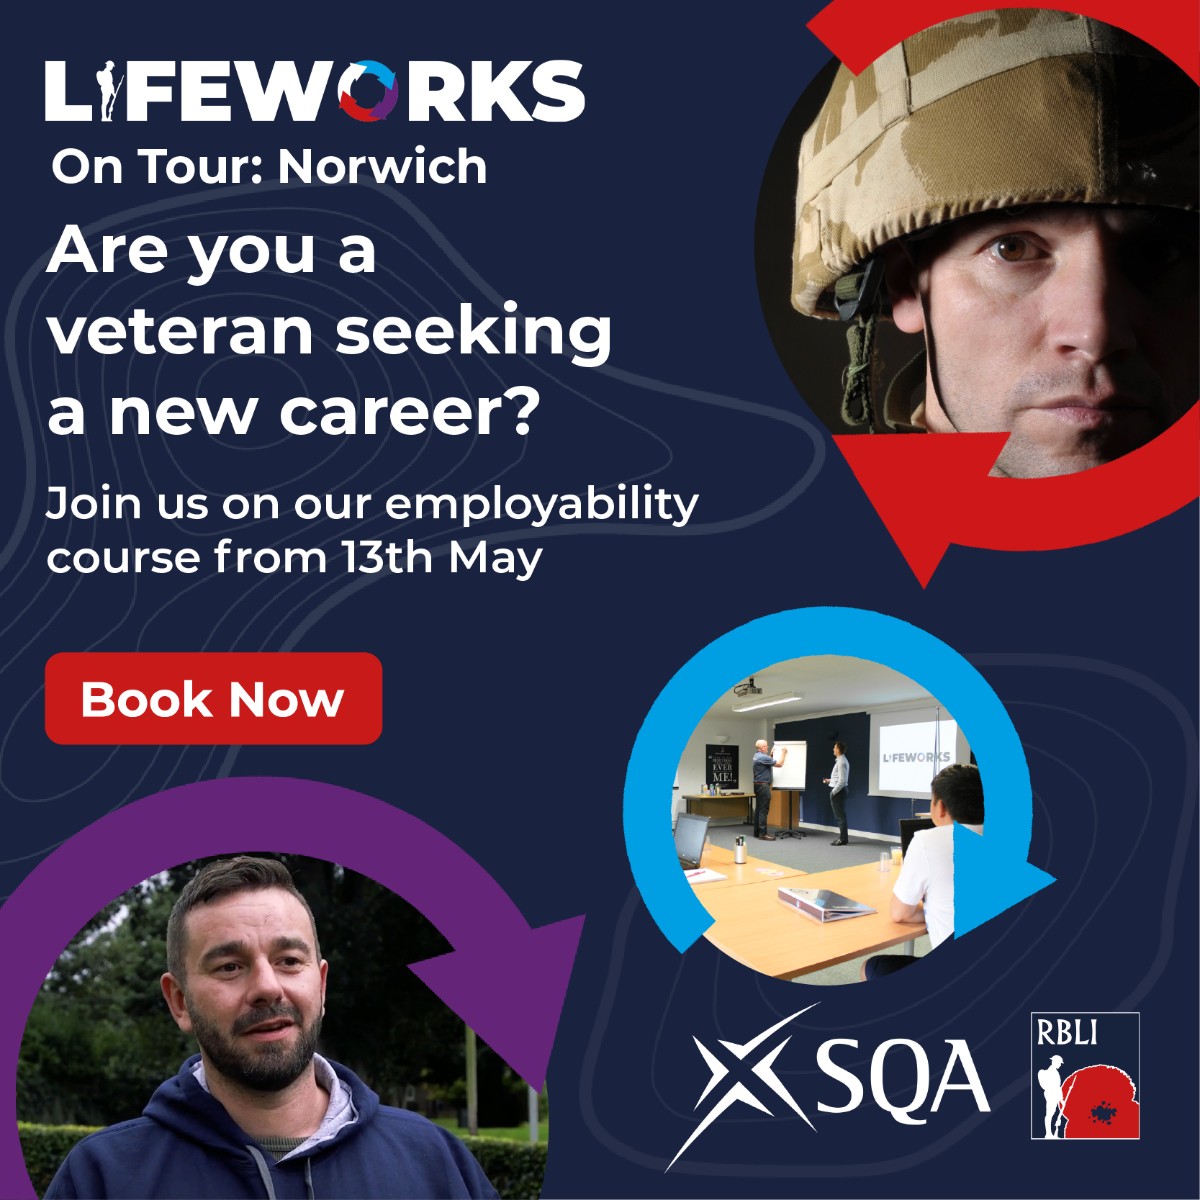 Our veteran-led Lifeworks team will be in Norwich from Monday 13th May providing our employment course to Armed Forces veterans. 💼📚 To find out more and to book your place, contact our Lifeworks team at lifeworks@rbli.co.uk or call 0800 3196 844.